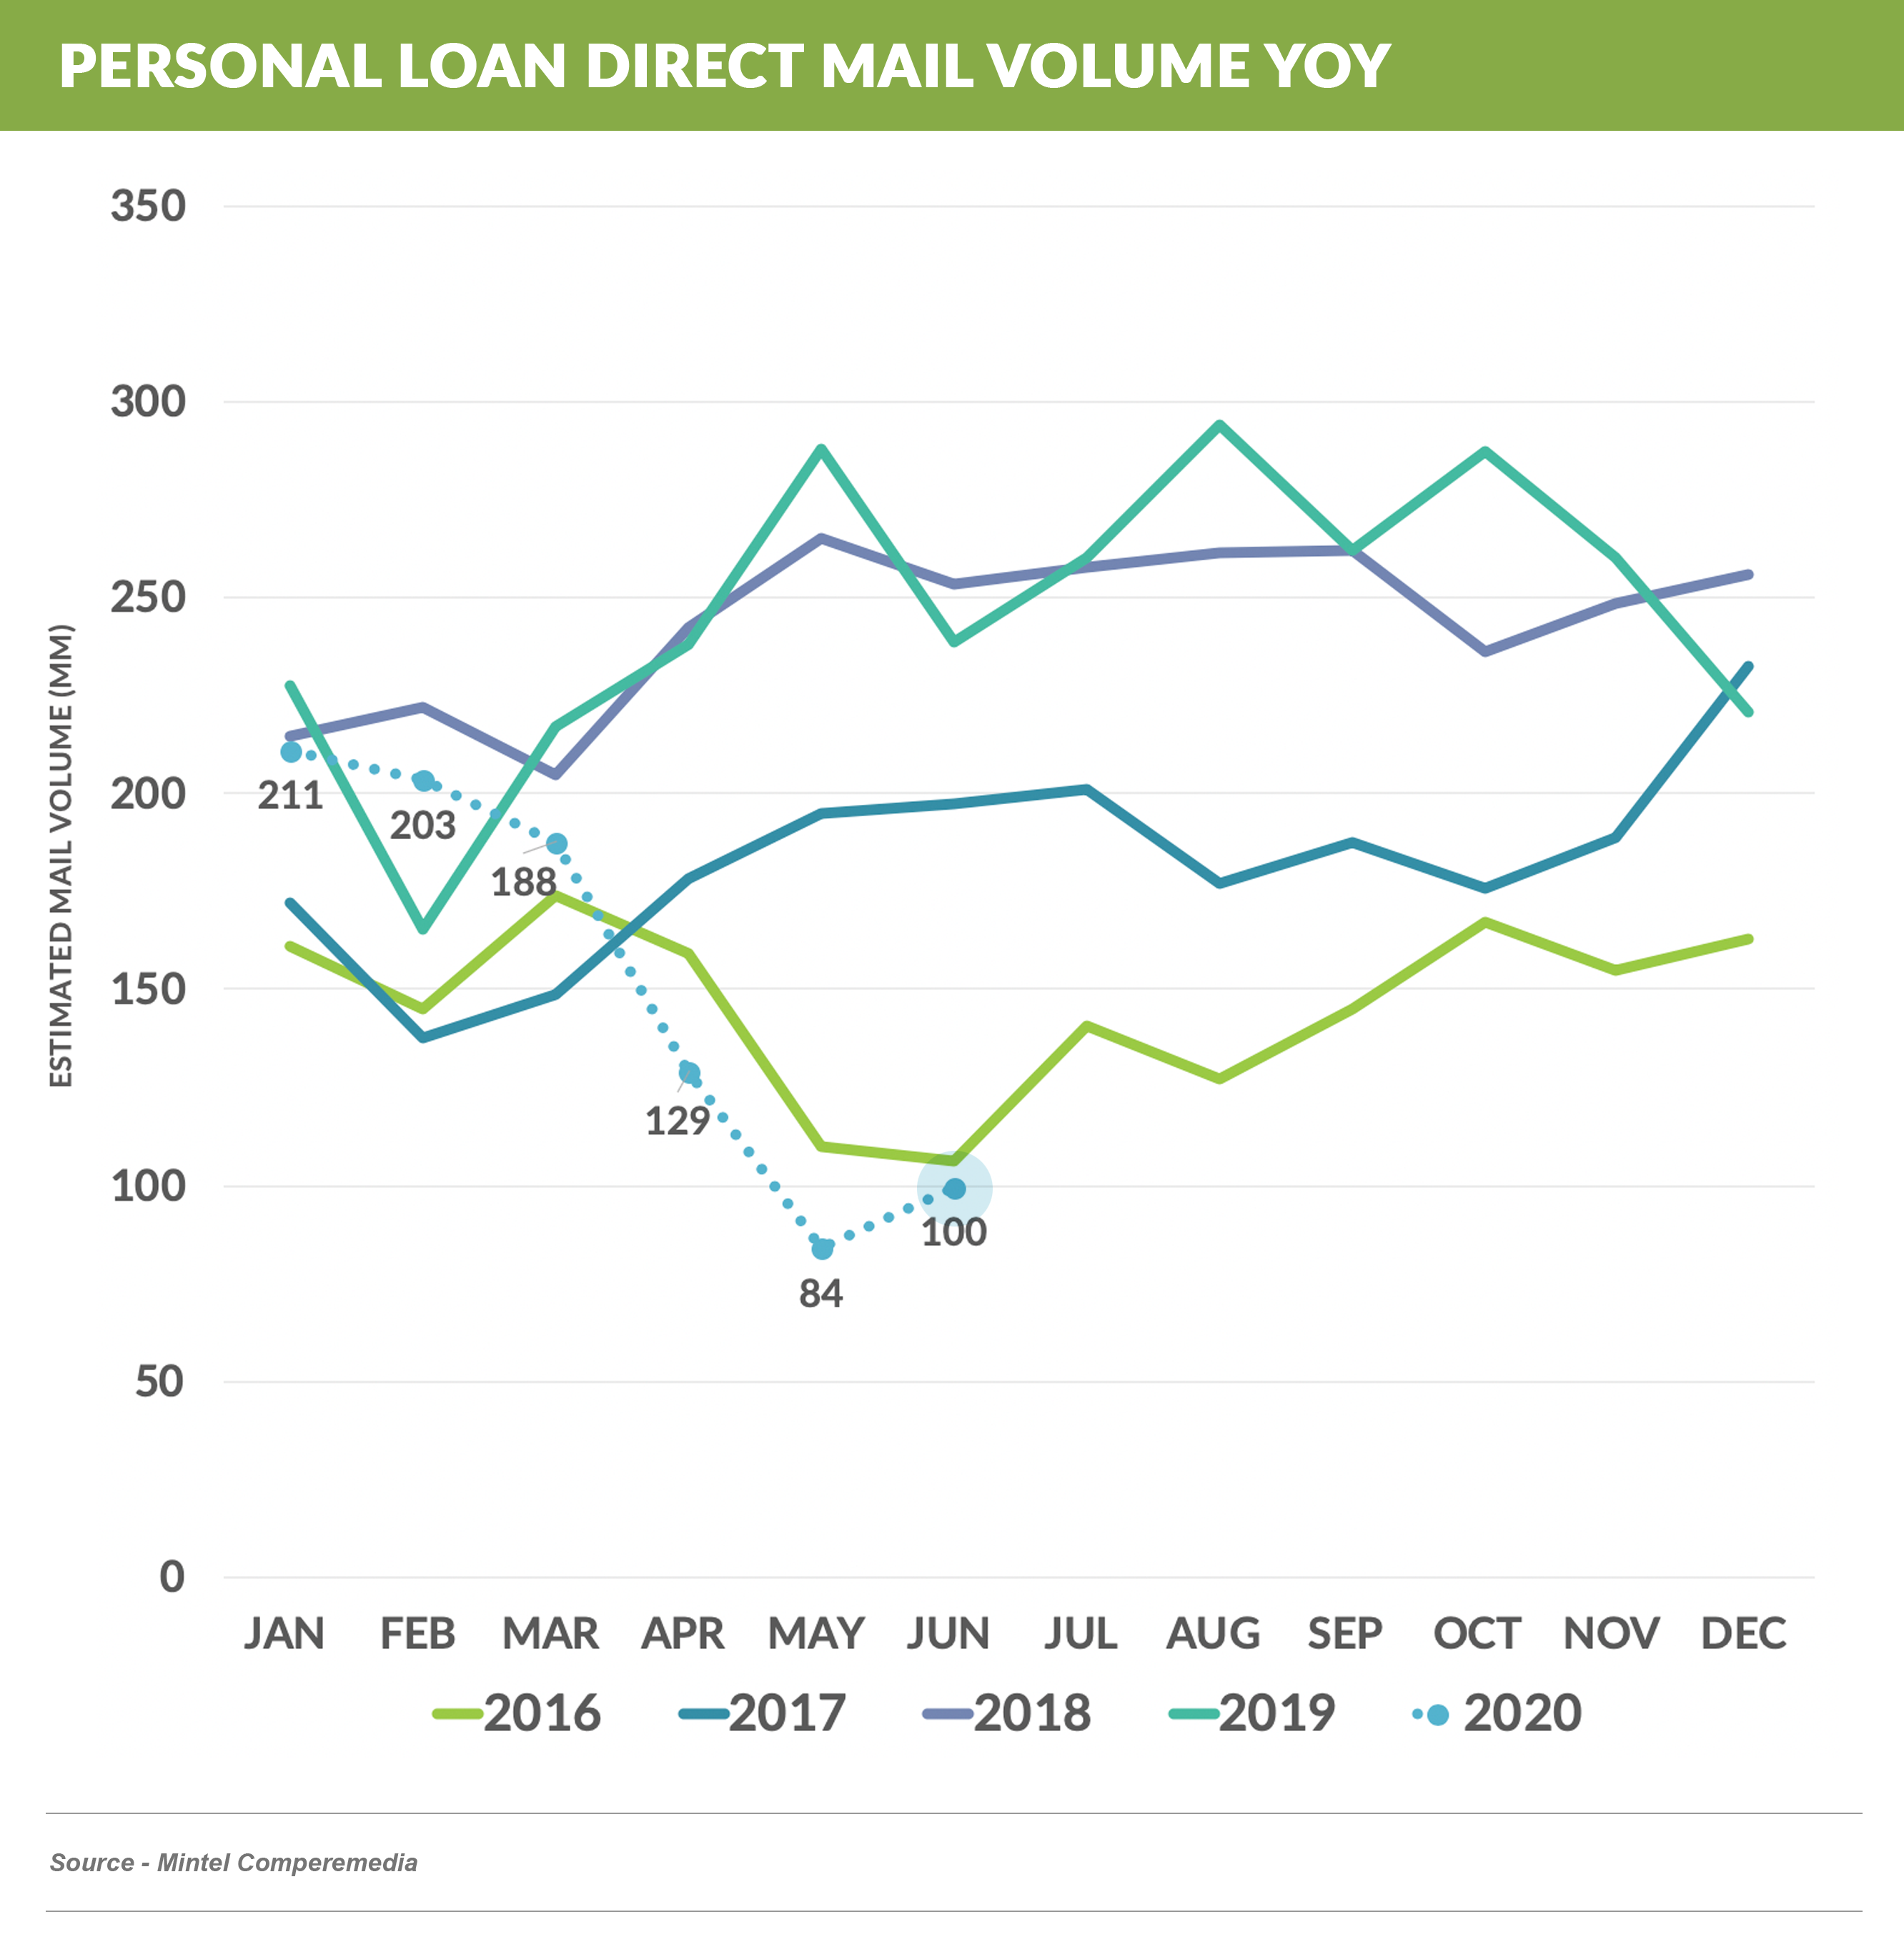 Unsecured Lending MAIL VOLUME YOY (2)